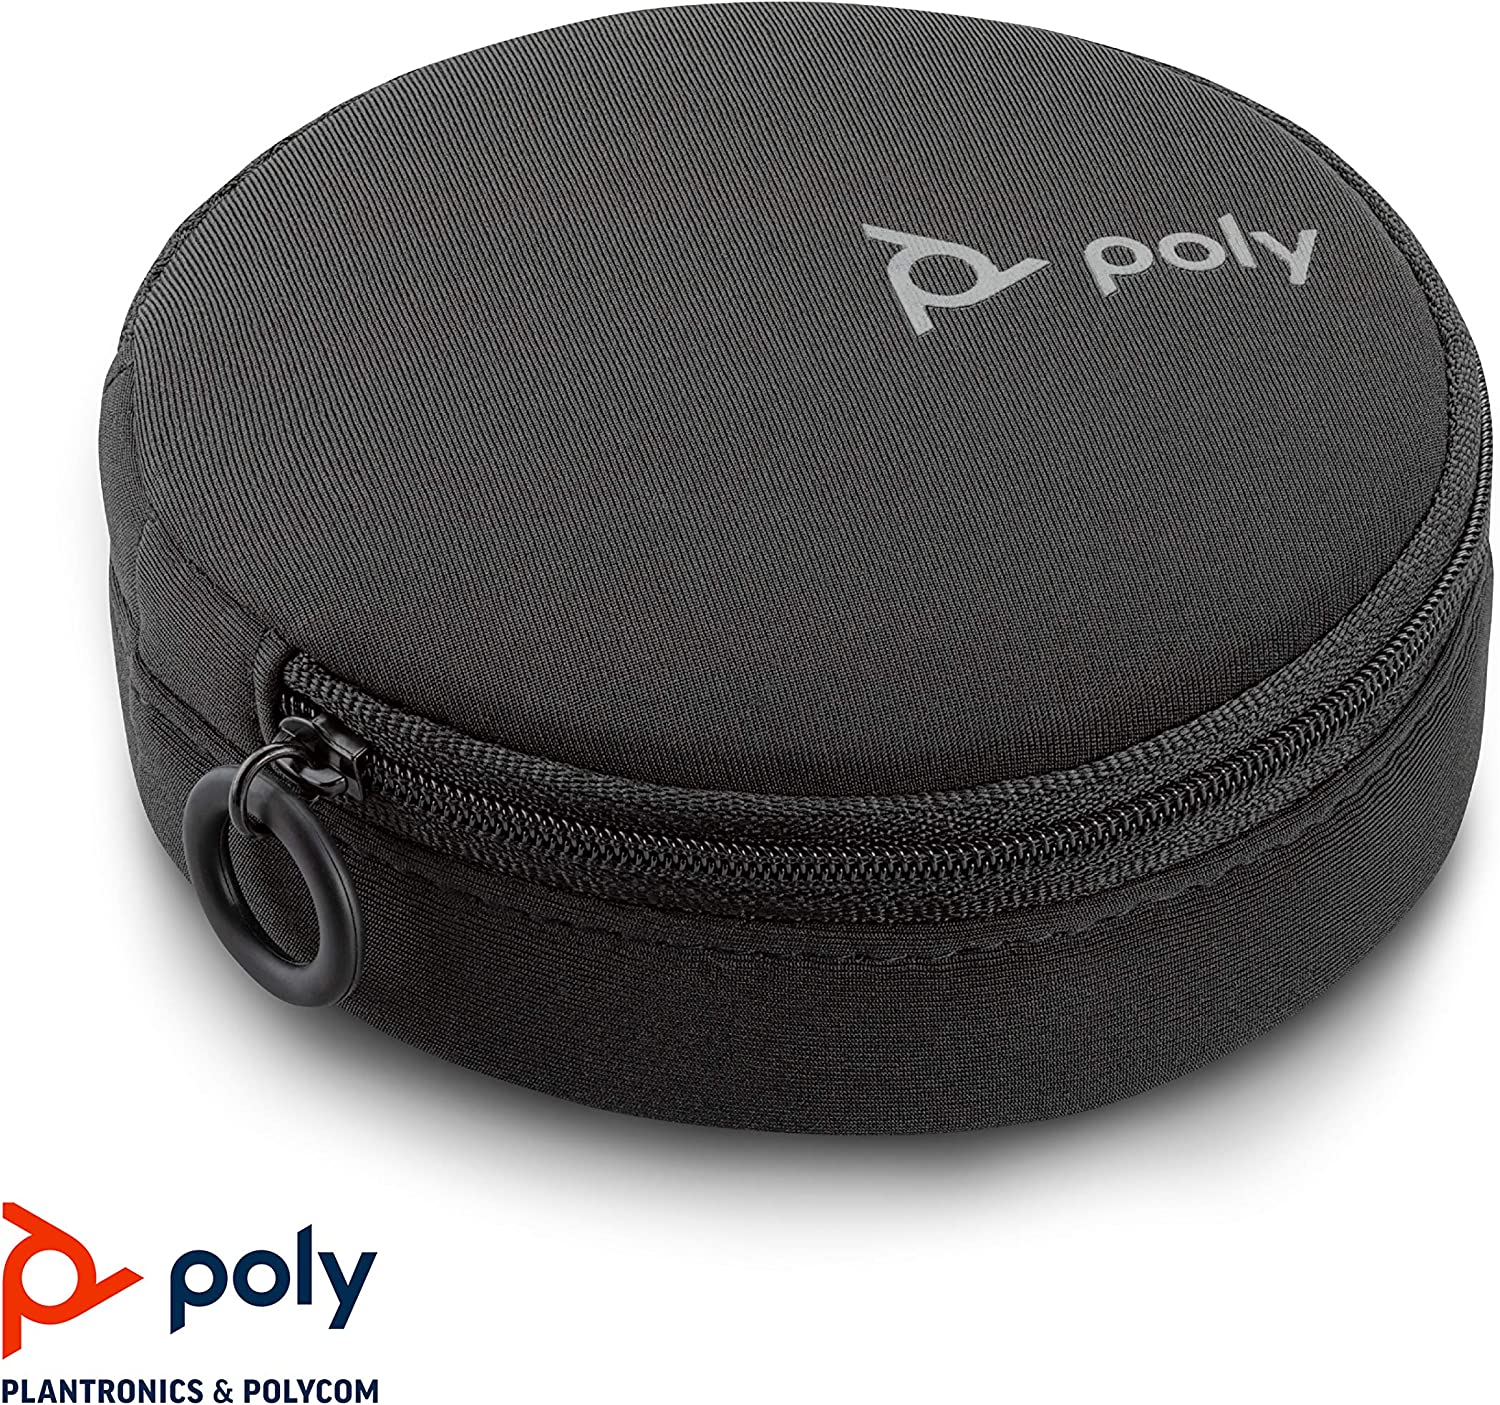 Poly 214181-01 Calisto 3200 CL3200-M USB-A Personal Corded UC 360 Degree Audio Speakerphone